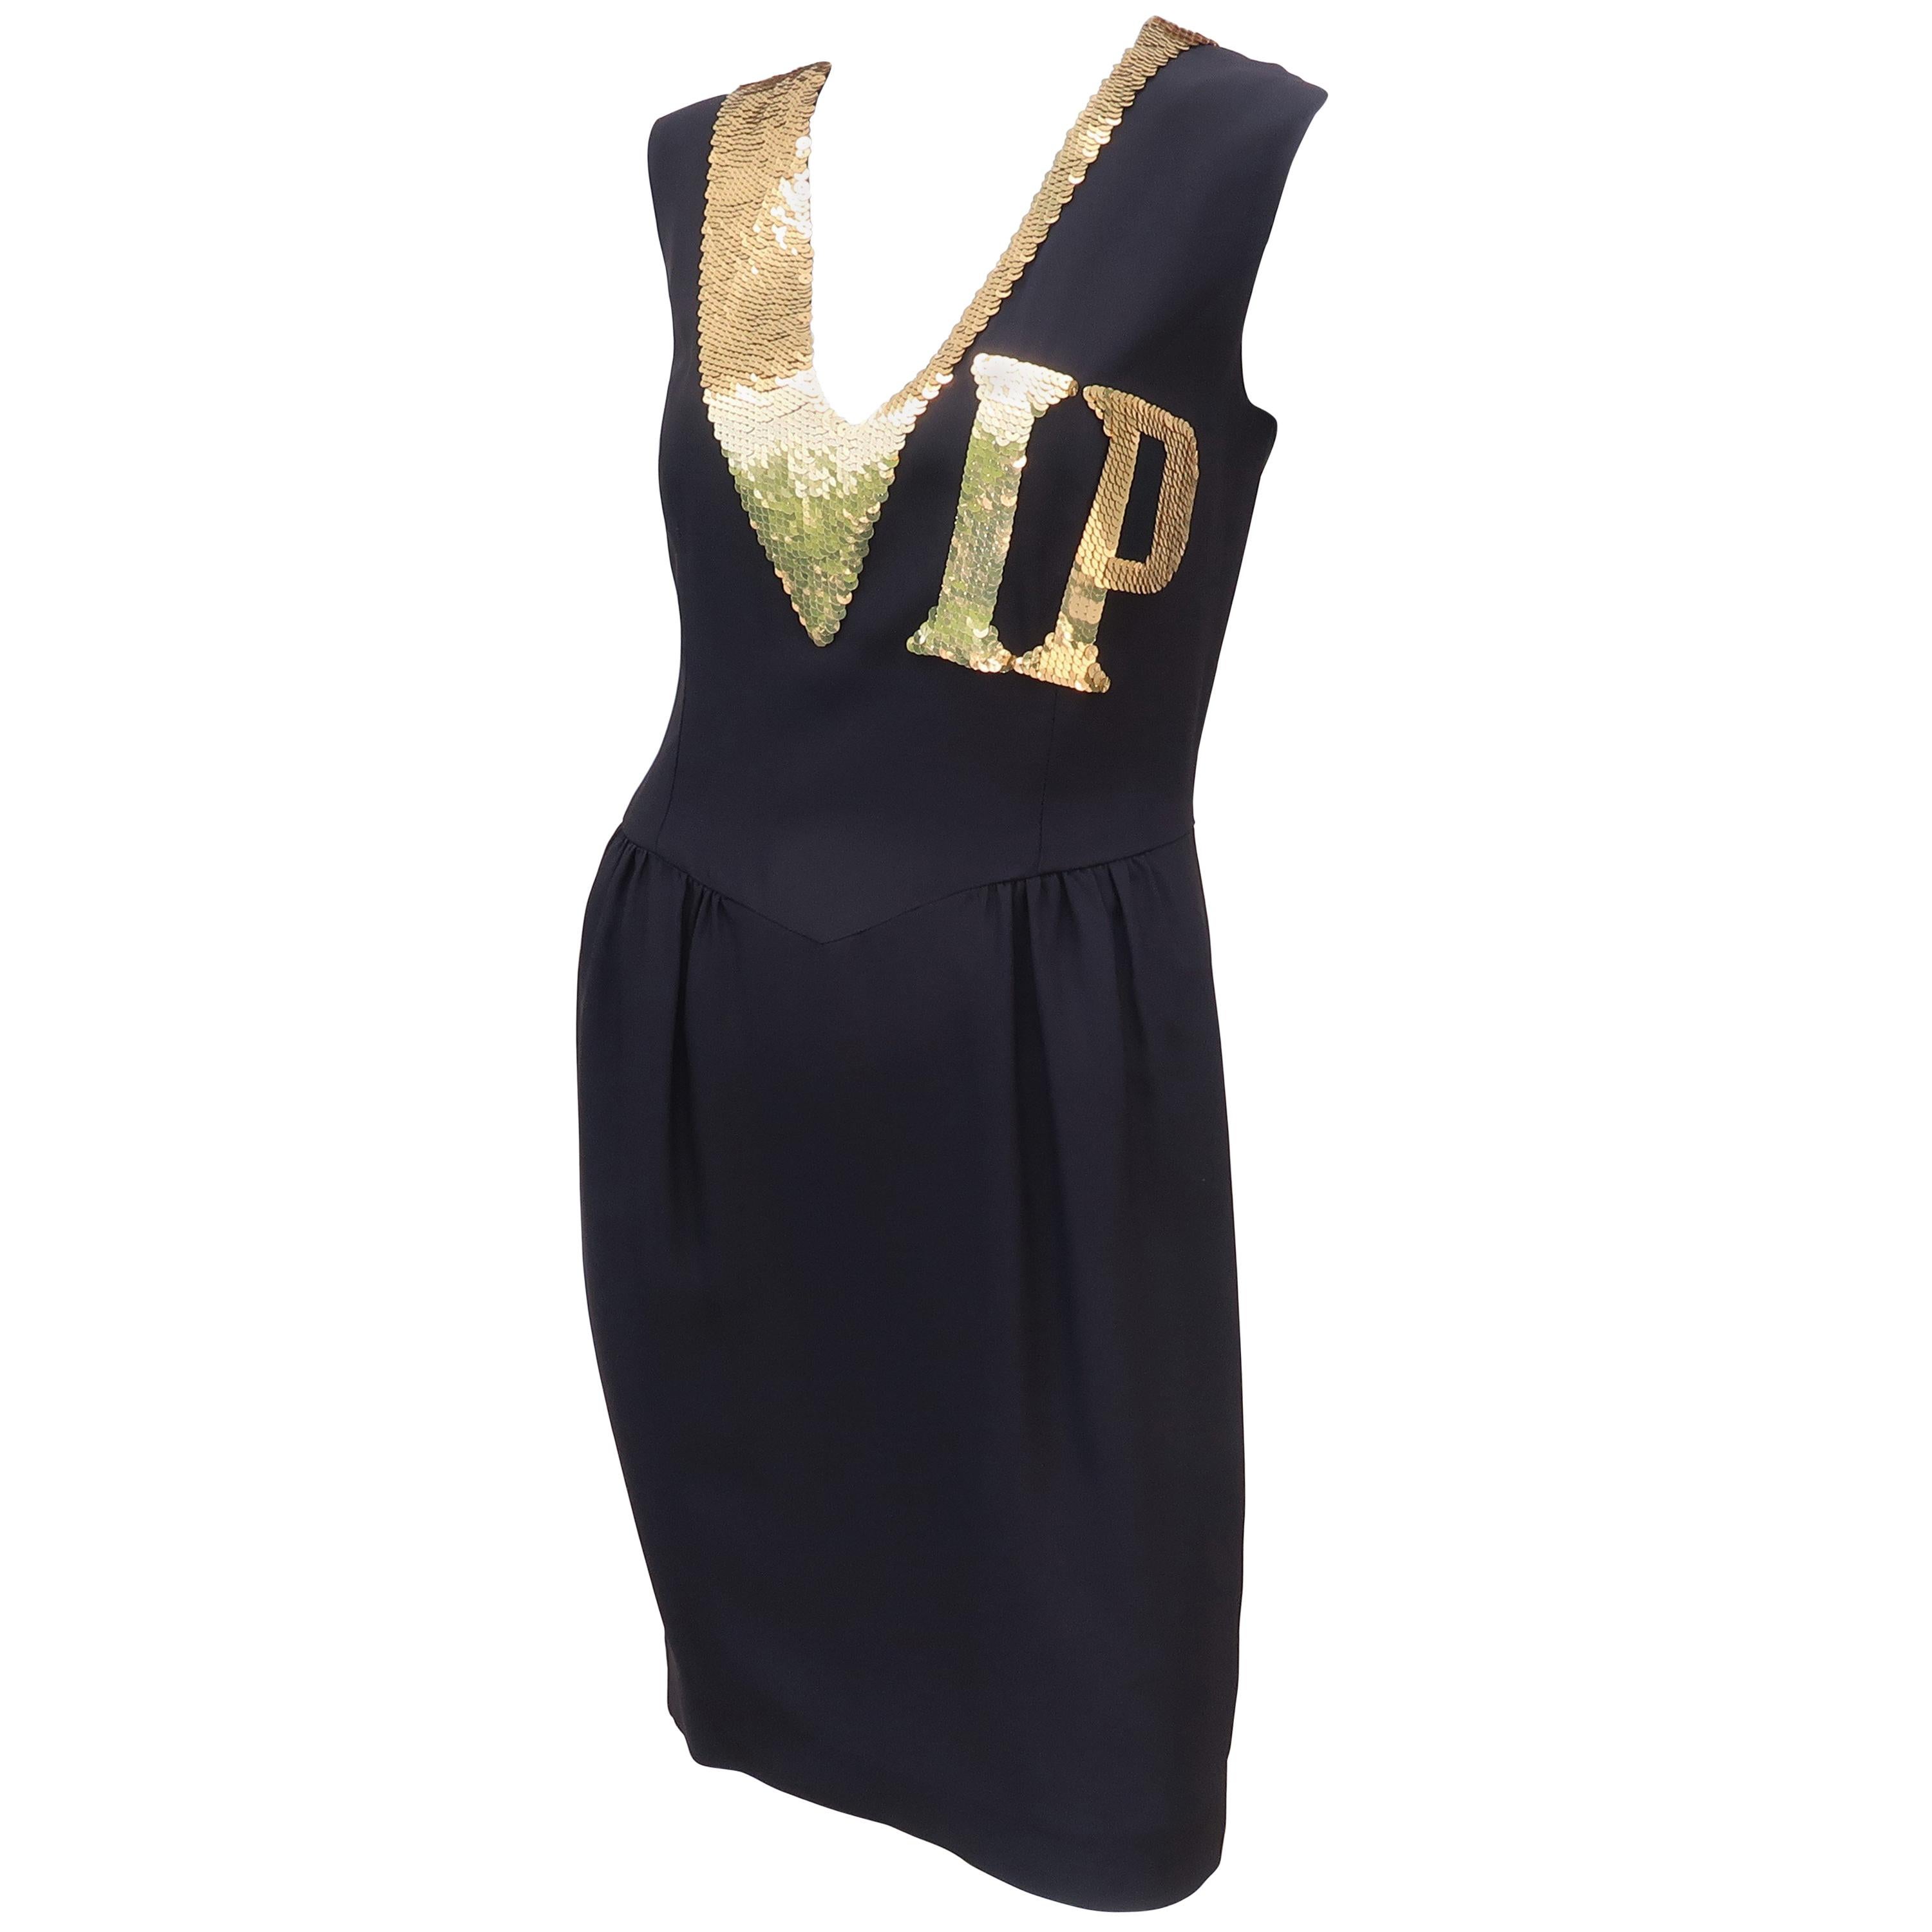 Moschino Couture Black & Gold Sequin ‘VIP’ Cocktail Dress